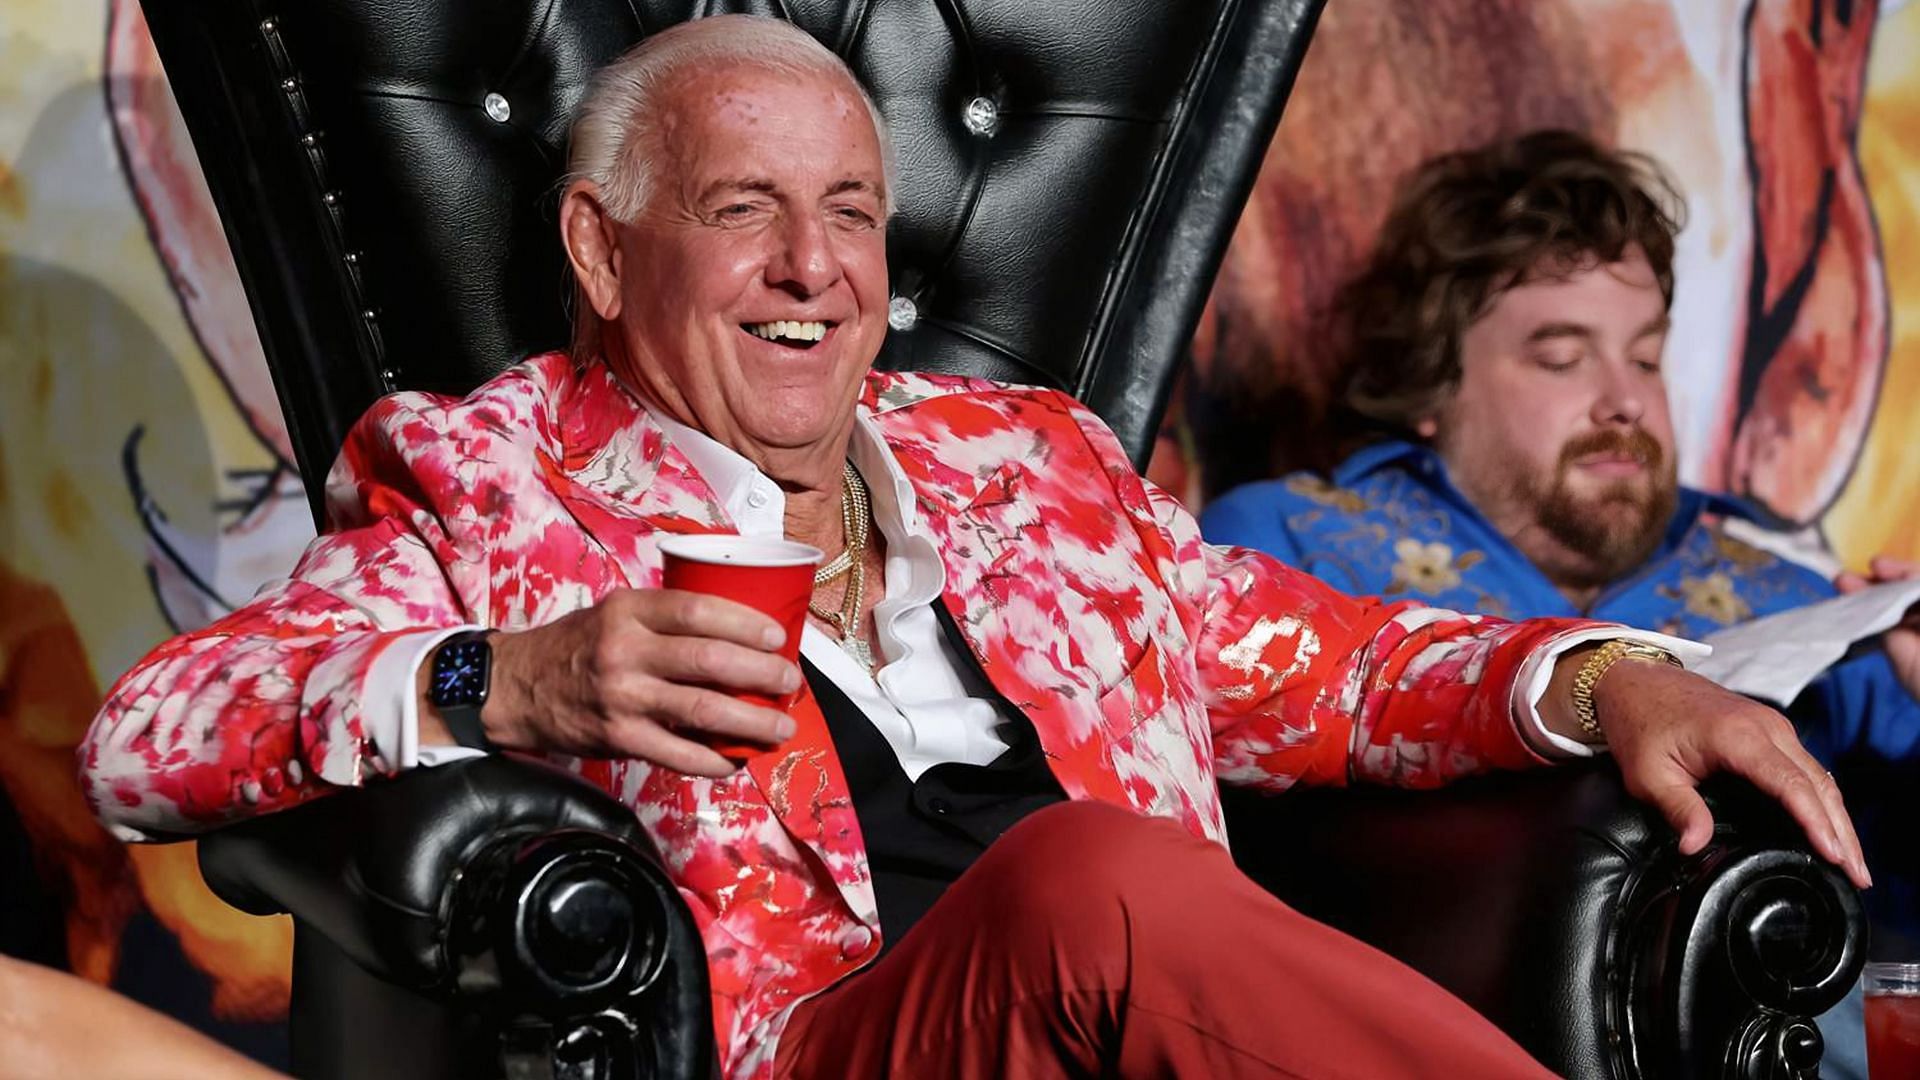 Ric Flair is coming home this Saturday night